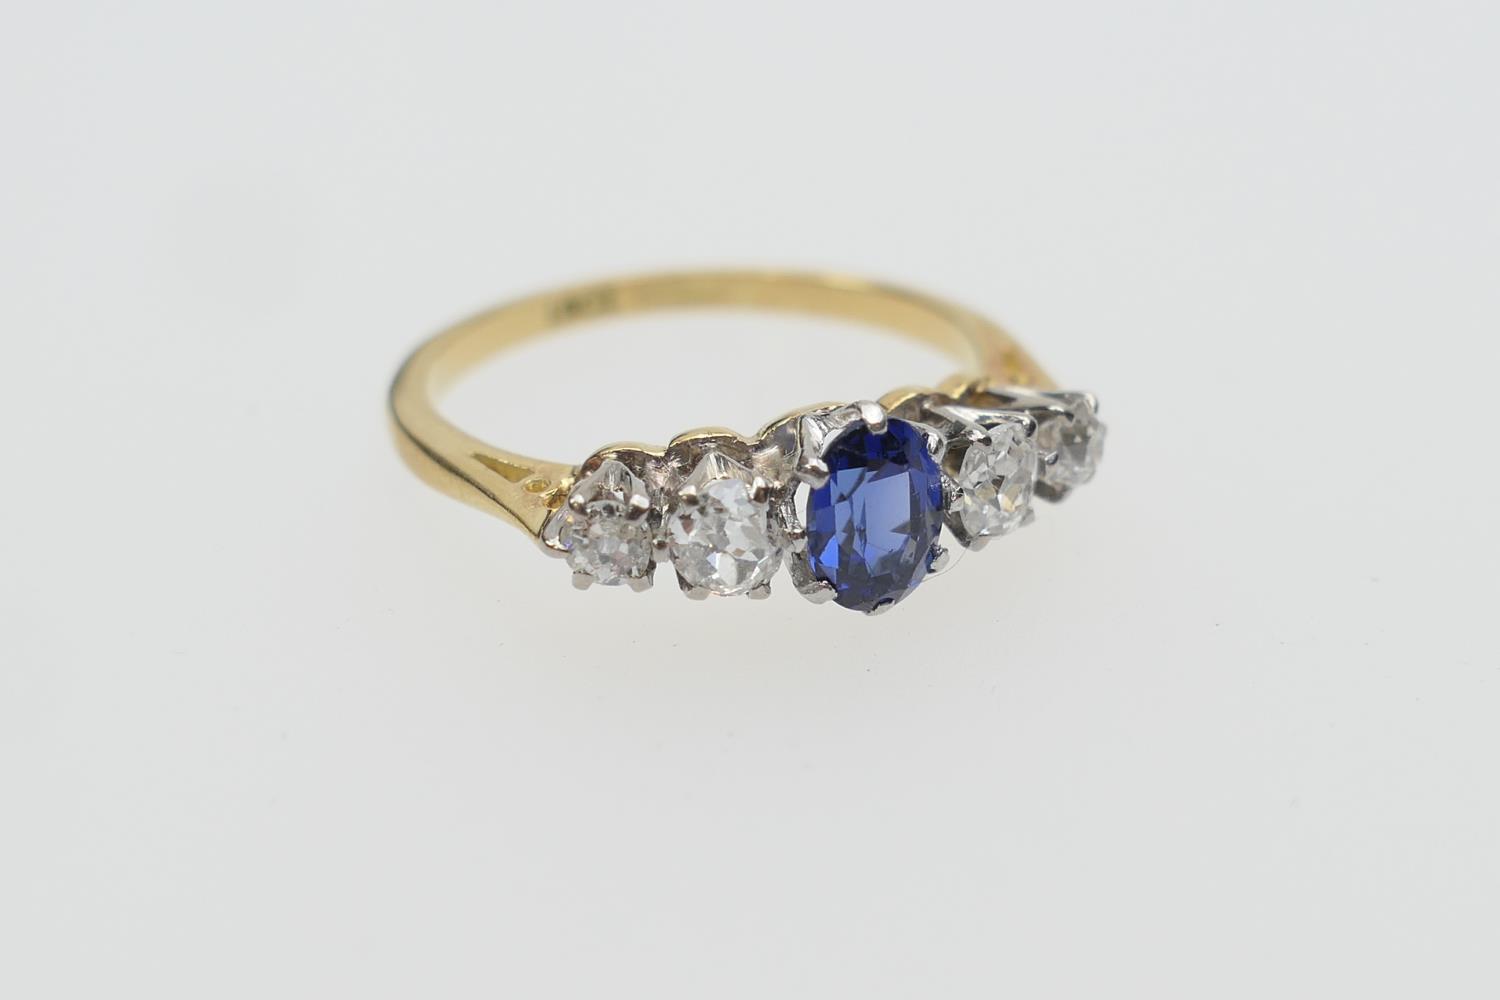 Sapphire and diamond five stone ring, centred with an oval cut sapphire of approx. 0.5ct flanked